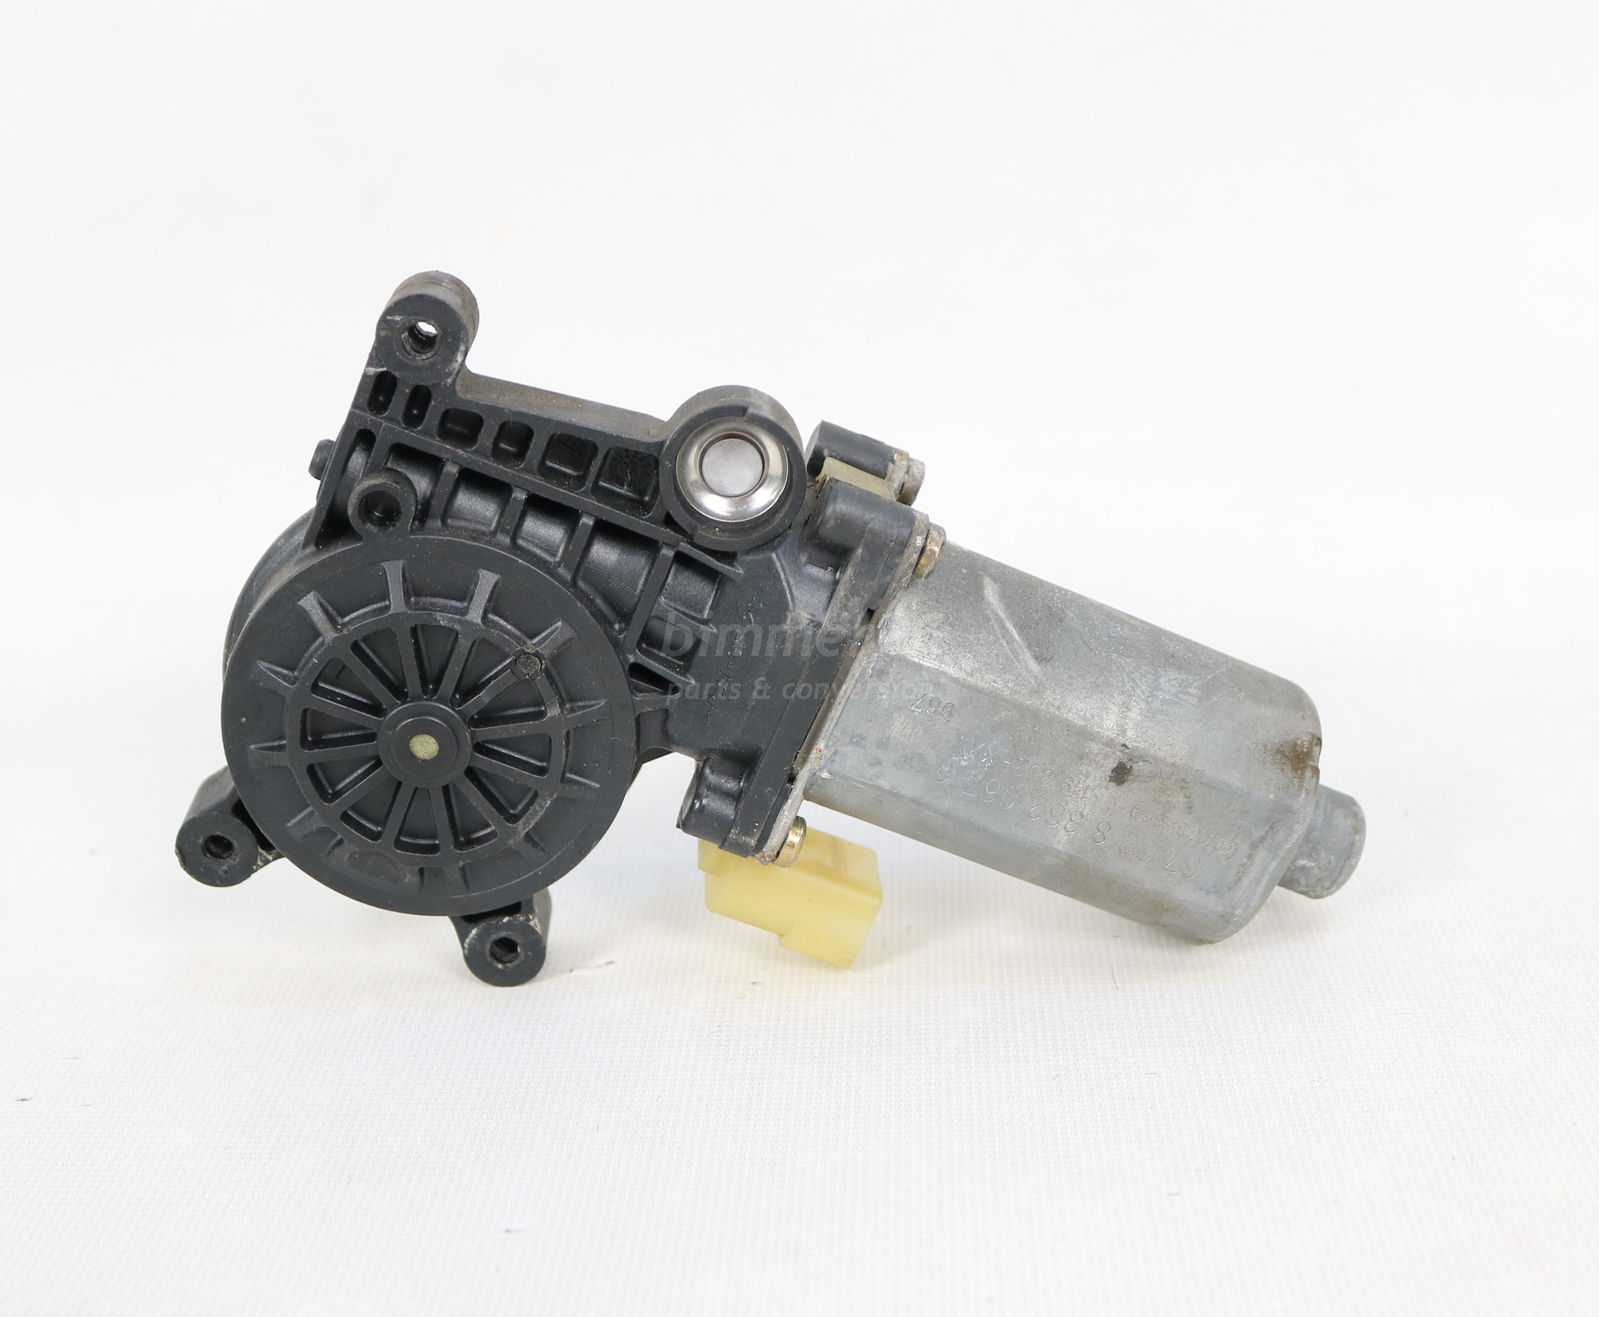 Picture of BMW 67628362065 Window Motor Lifting Gearbox Drive Right Rear Door Sedan Left Rear Convertible E46 for sale